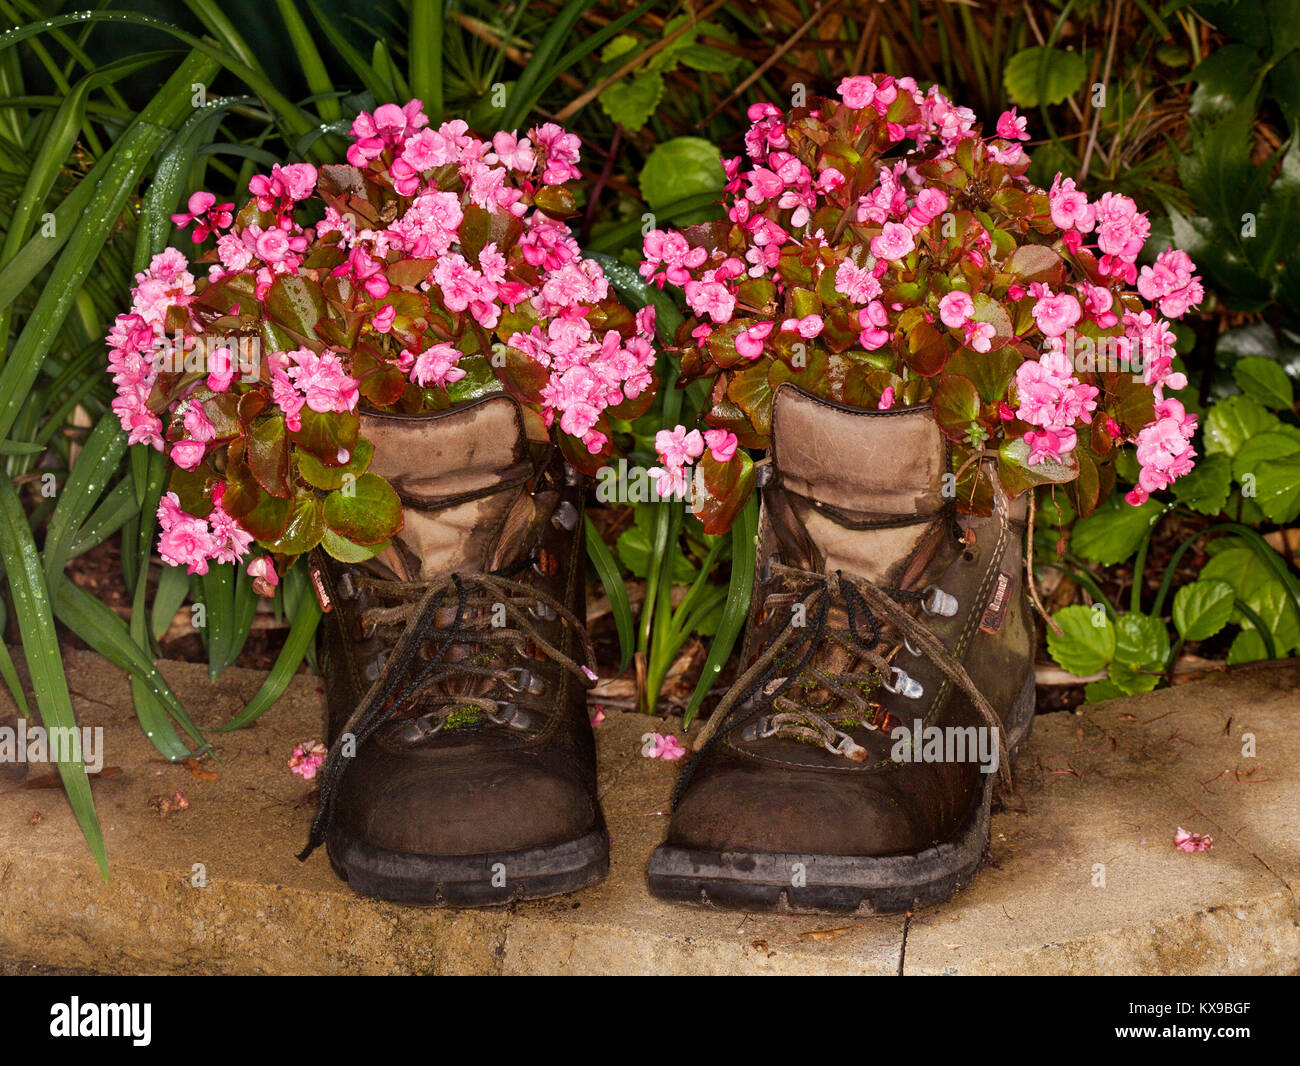 Pink flowers of bedding begonias growing in pair of recycled leather boots Stock Photo